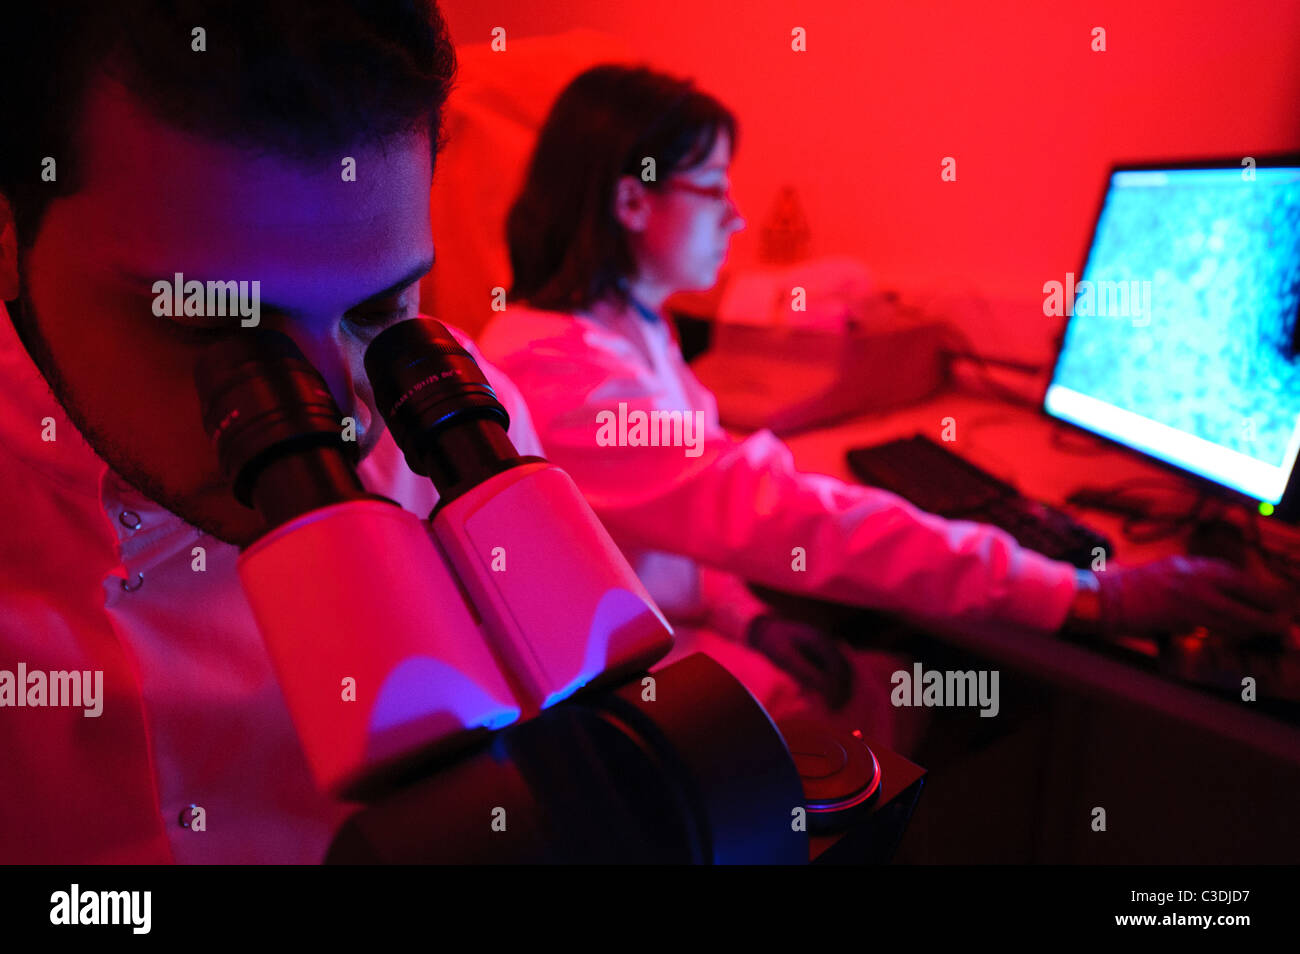 male and female scientists in science darkroom with red lighting looking down microscope with computer screen in background Stock Photo